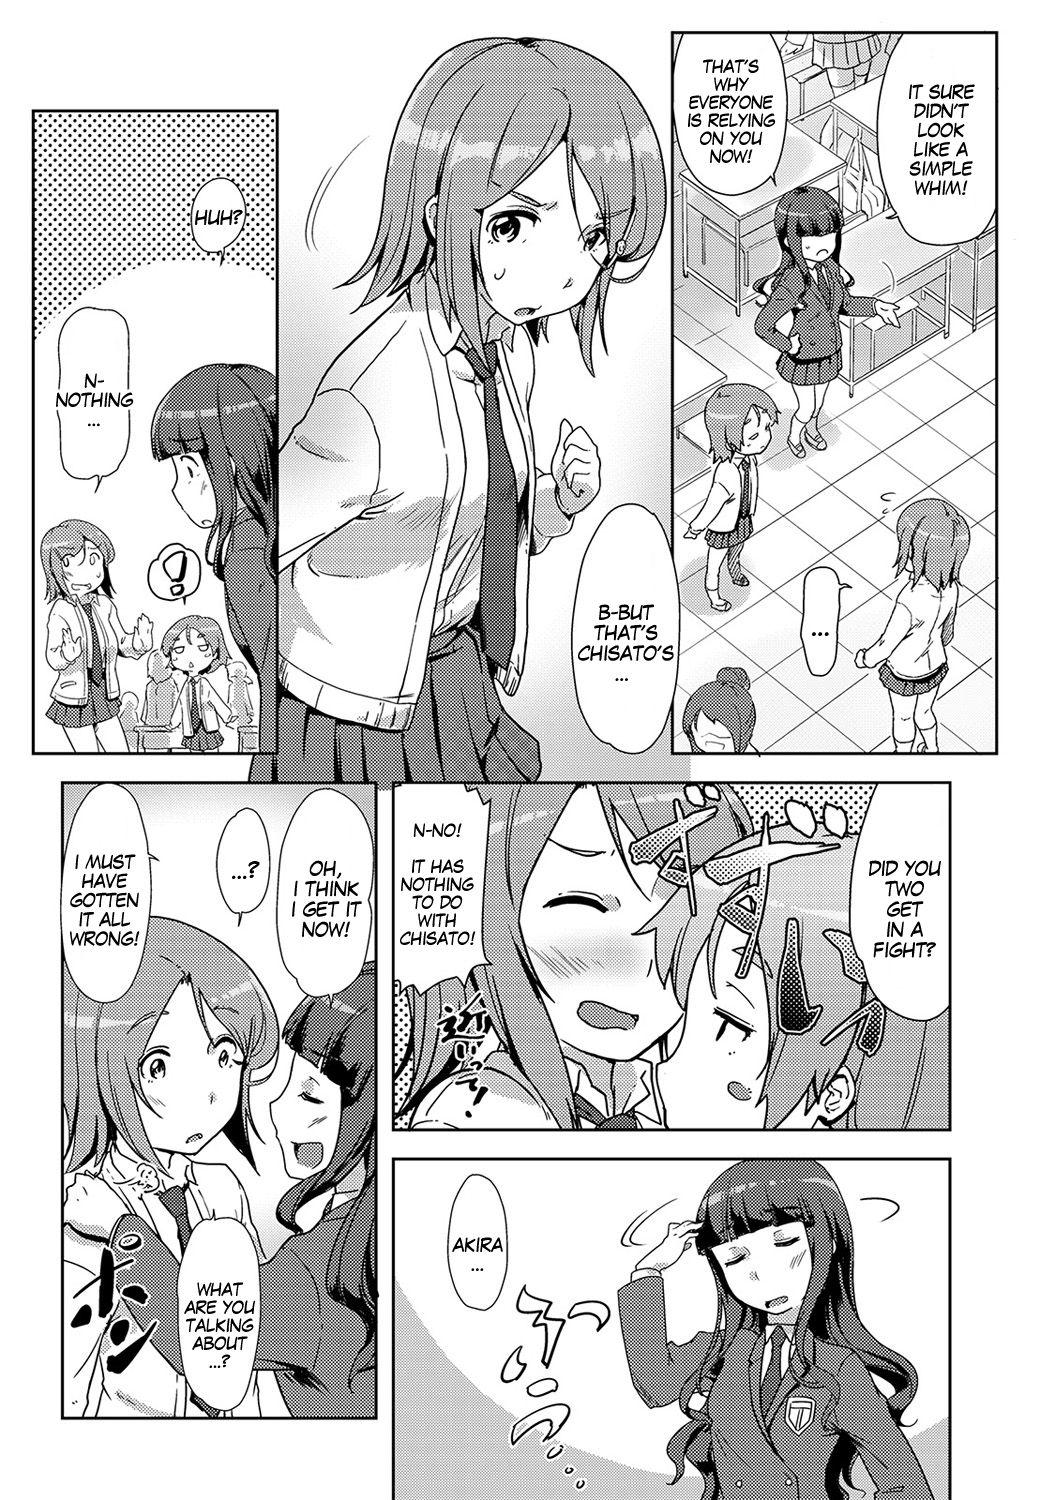 Wives Ecchi Shitara Irekawacchatta!? | We Switched Our Bodies After Having Sex!? Ch. 5 Good - Page 6